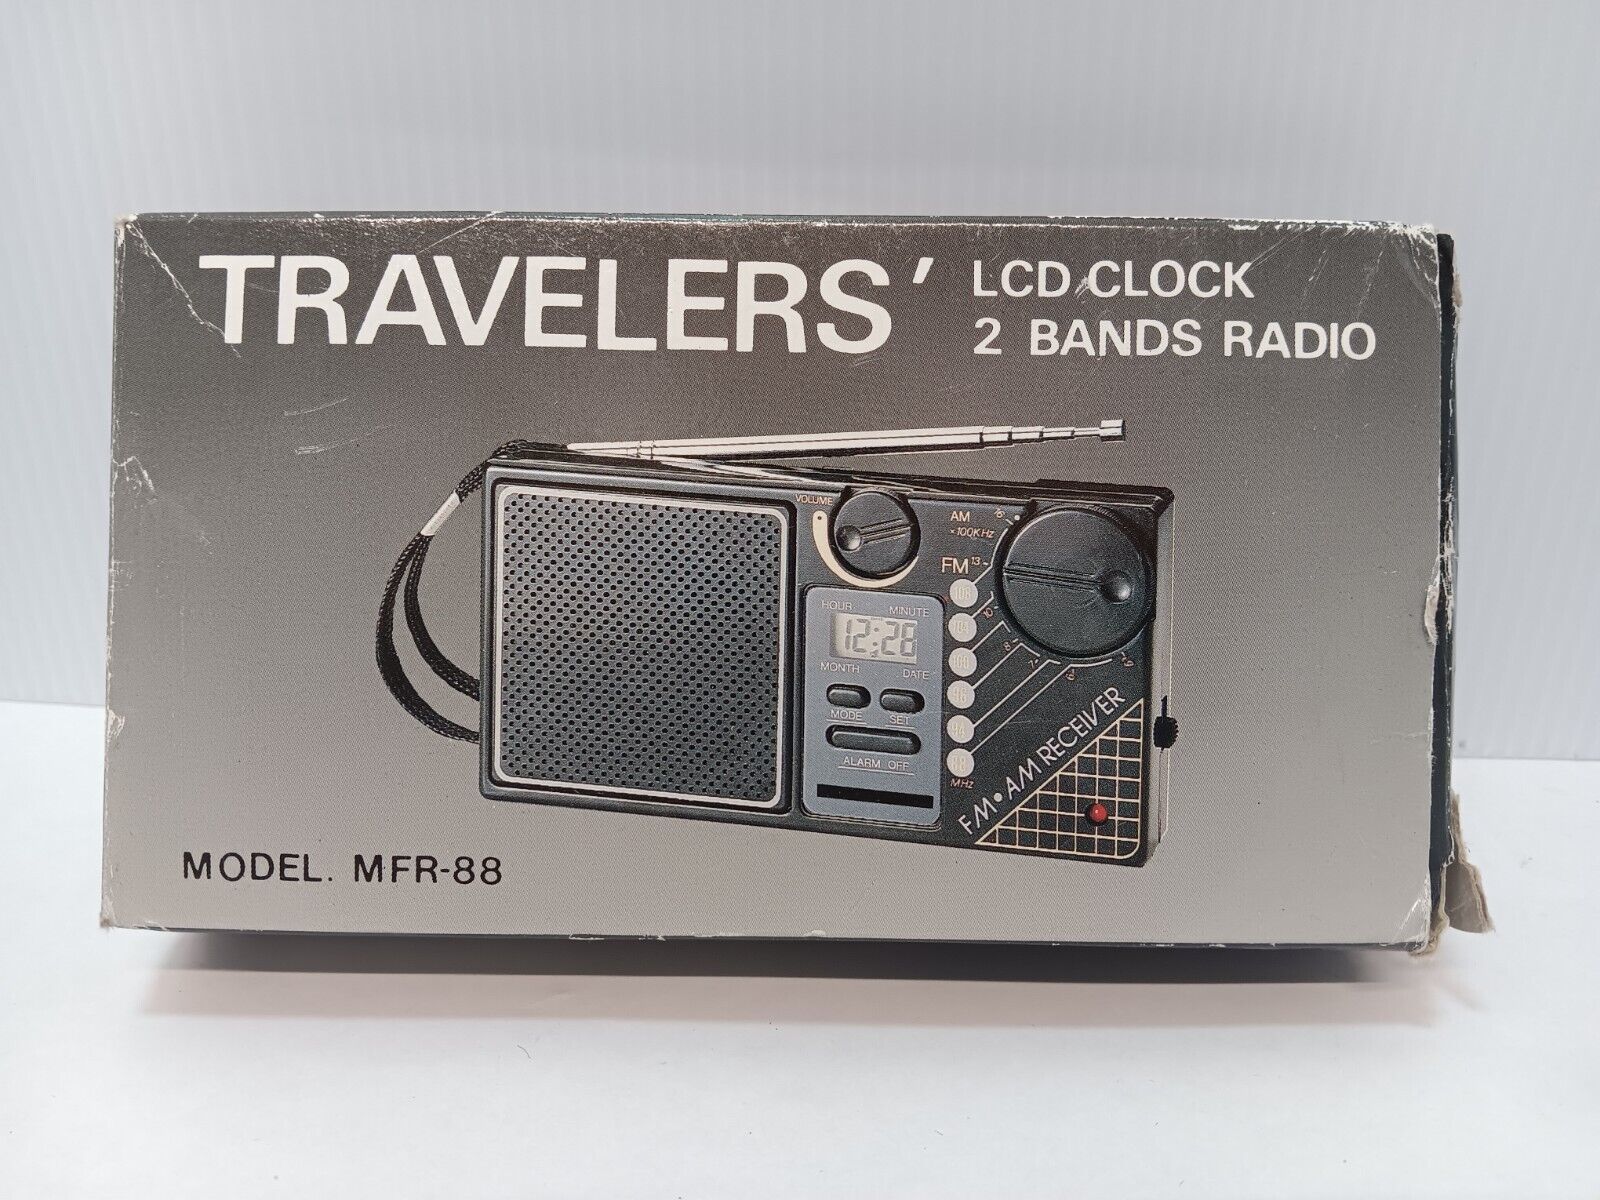 Travelers LCD AM/FM Clock Radio With Alarm Model MFR-88 Tested Works Preowned - $18.69